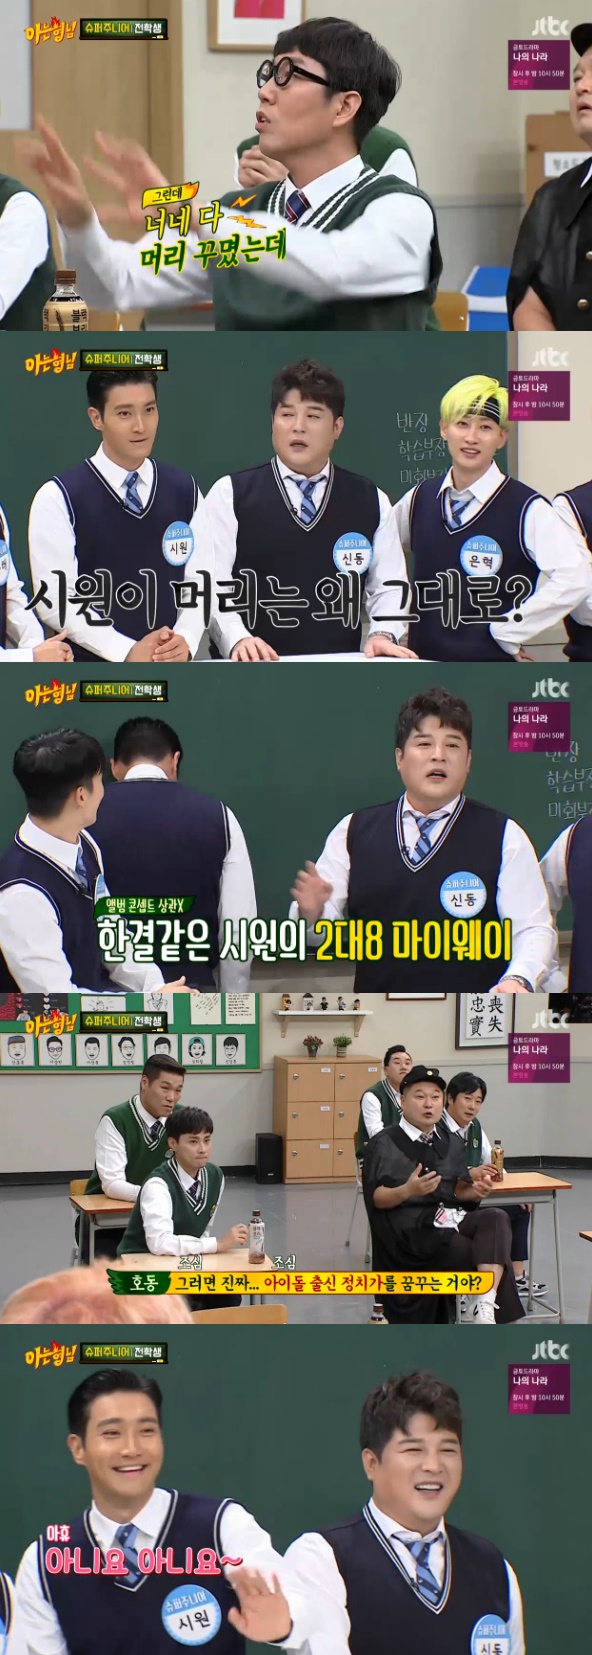 Shindong predicted Choi Siwons Future (?).On October 12, JTBC Knowing Brother, group Super Junior member Shindong revealed the secret of Choi Choi Siwon hair style.Kim Young-chul wondered, Super Junior is all hair-dressed, but Choi Choi Siwon is why it is.Shindong joked that Choi Siwon will do the Members of Parliament later, but replied, Choi Siwon will do 2 to 8 garmas for any concept.Kang Ho-dong, who listened to this, said, Choi Siwon is dreaming of an idol politician. Choi Choi Siwon explained, No.han jung-won